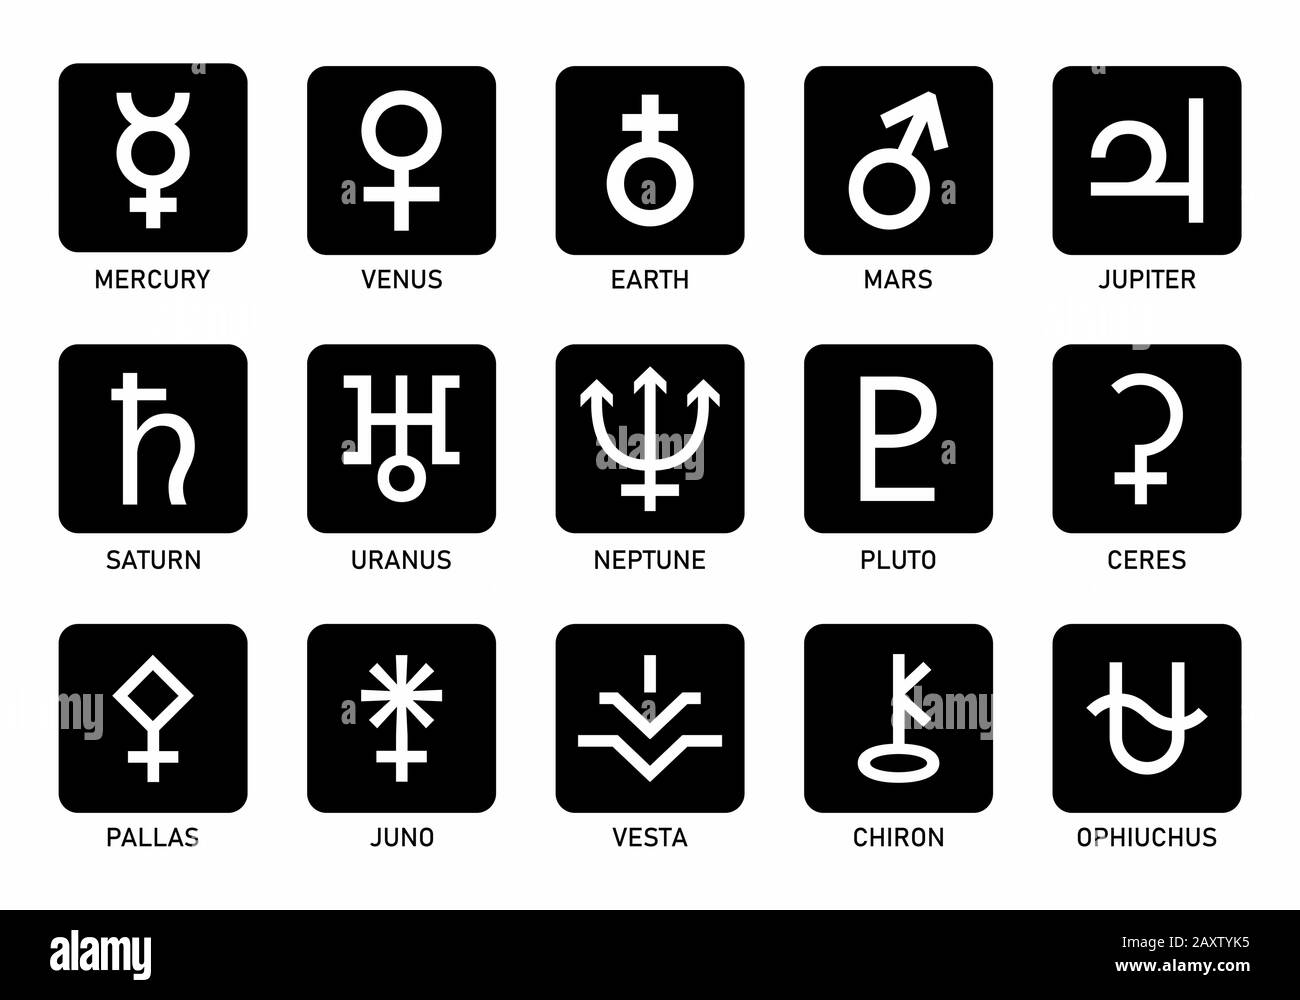 Meaningful Symbols And Their Meanings